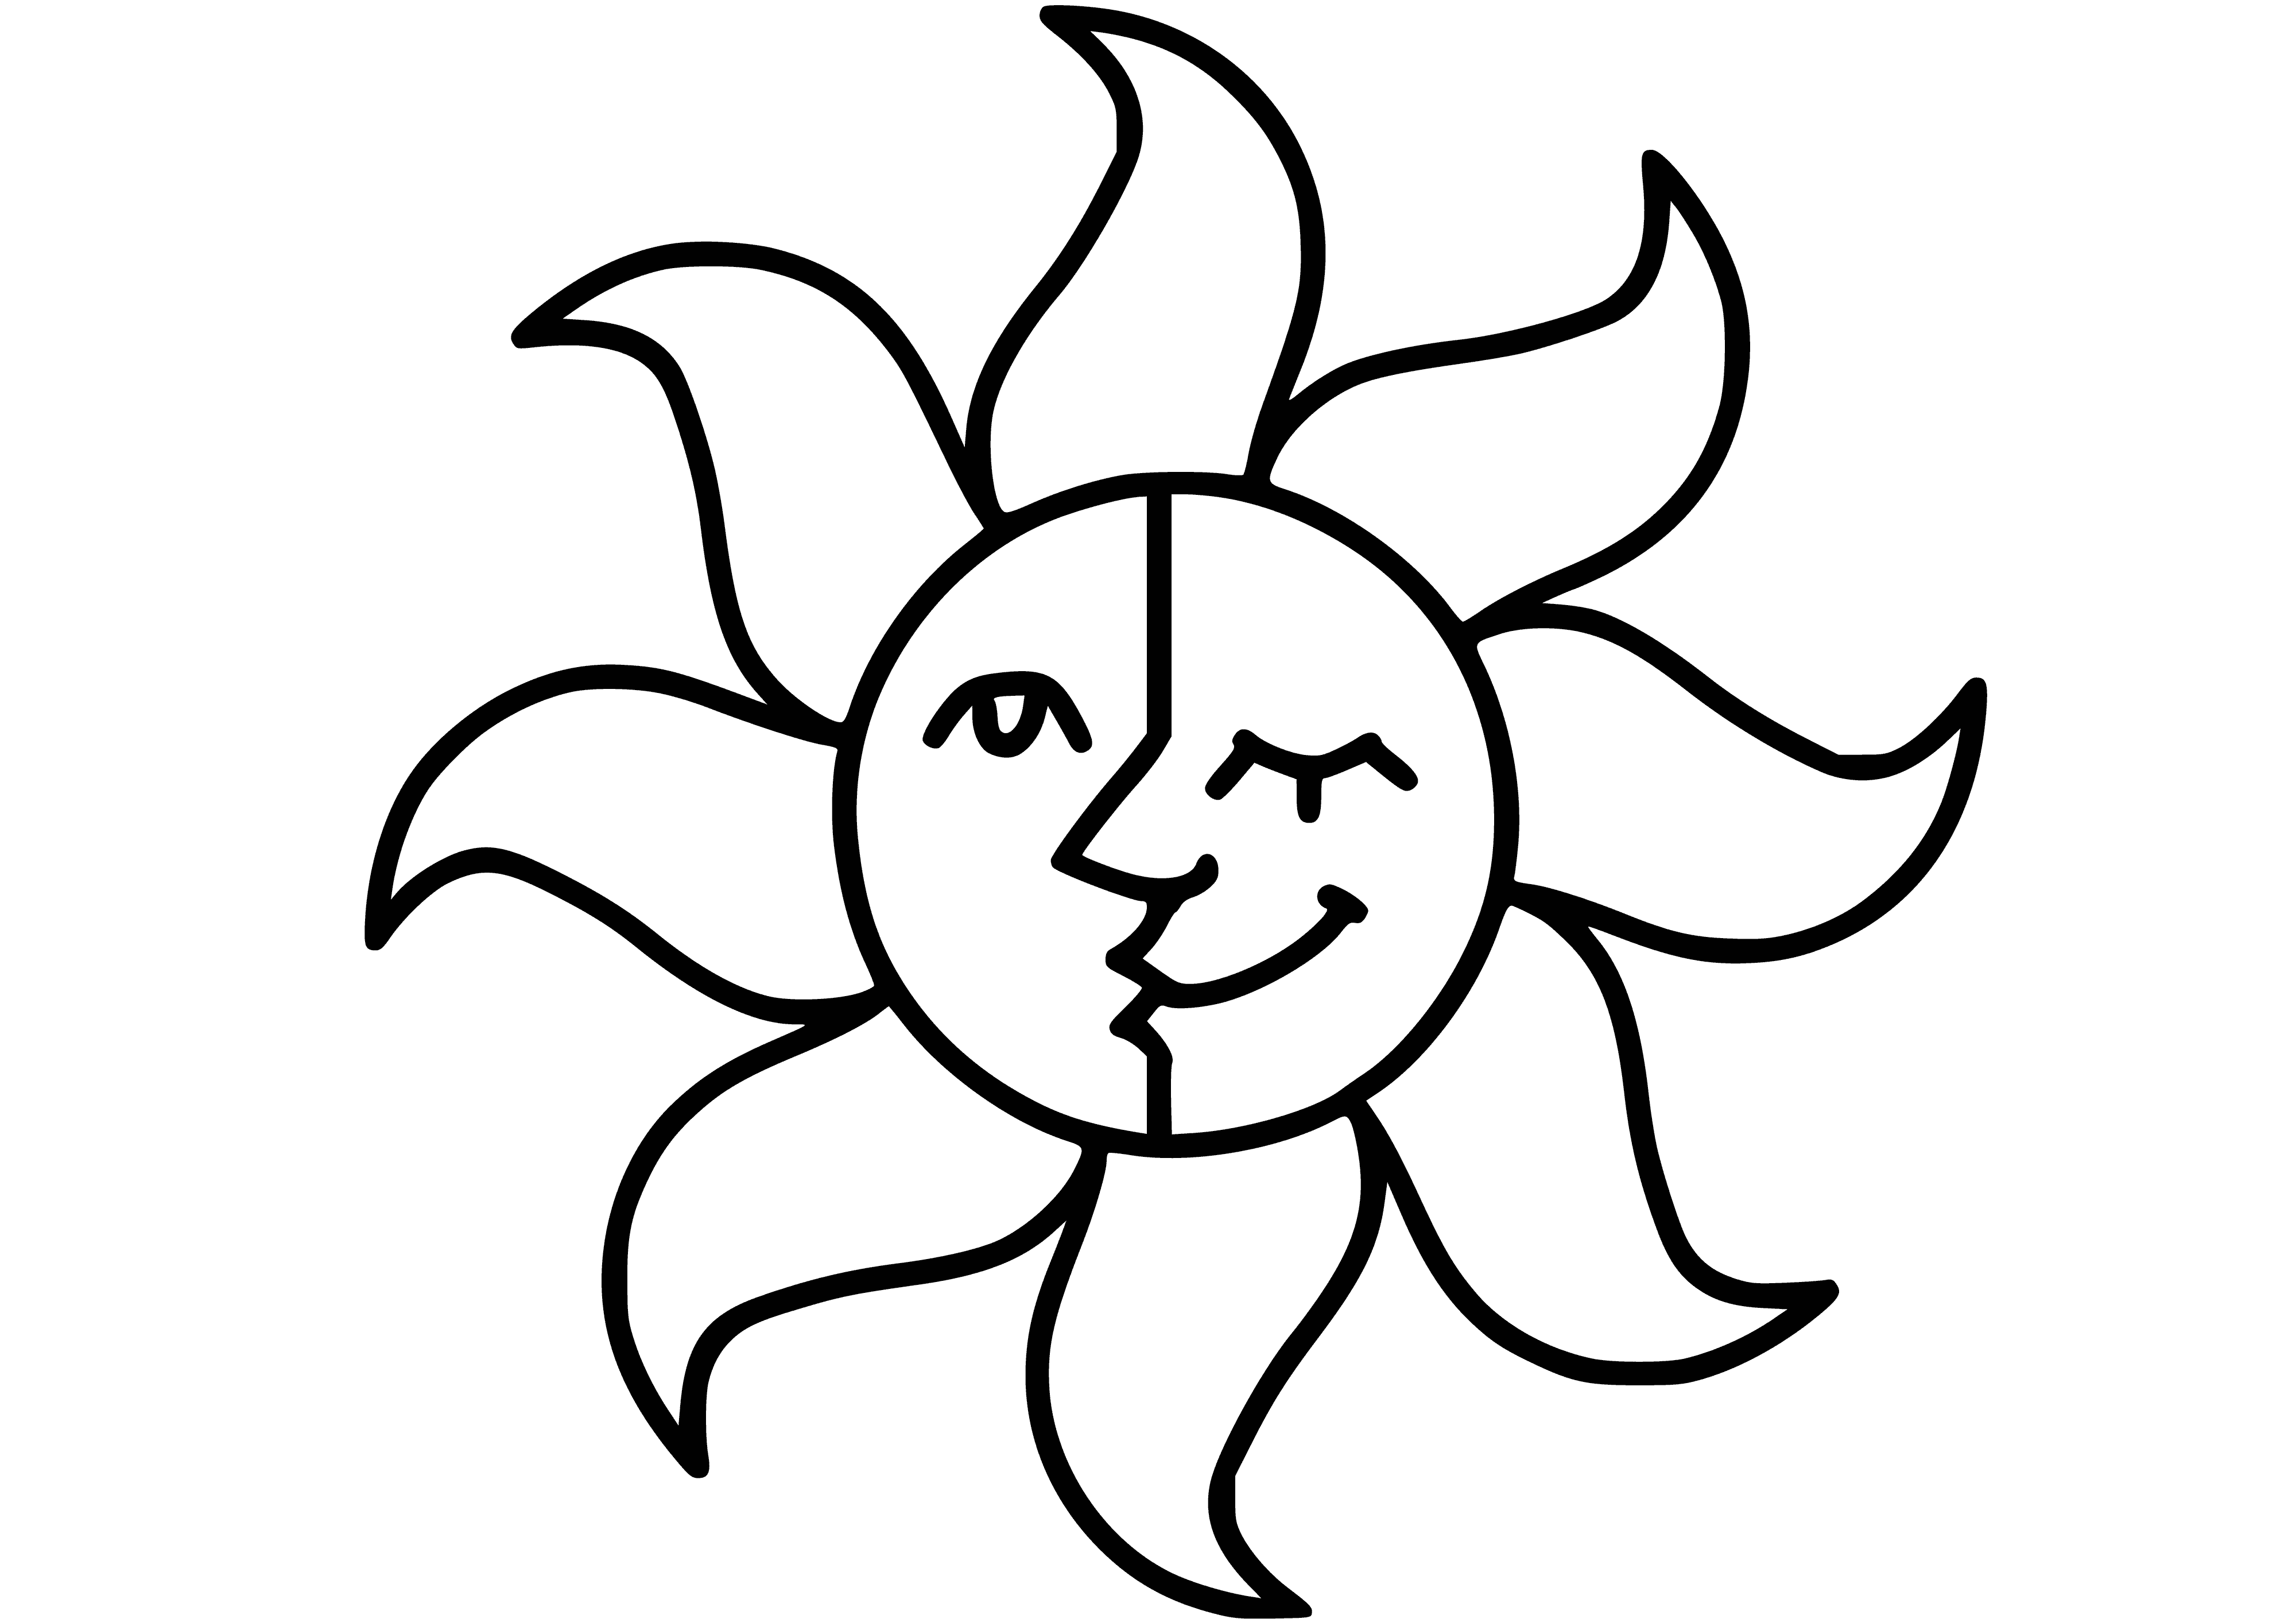 Sun coloring page